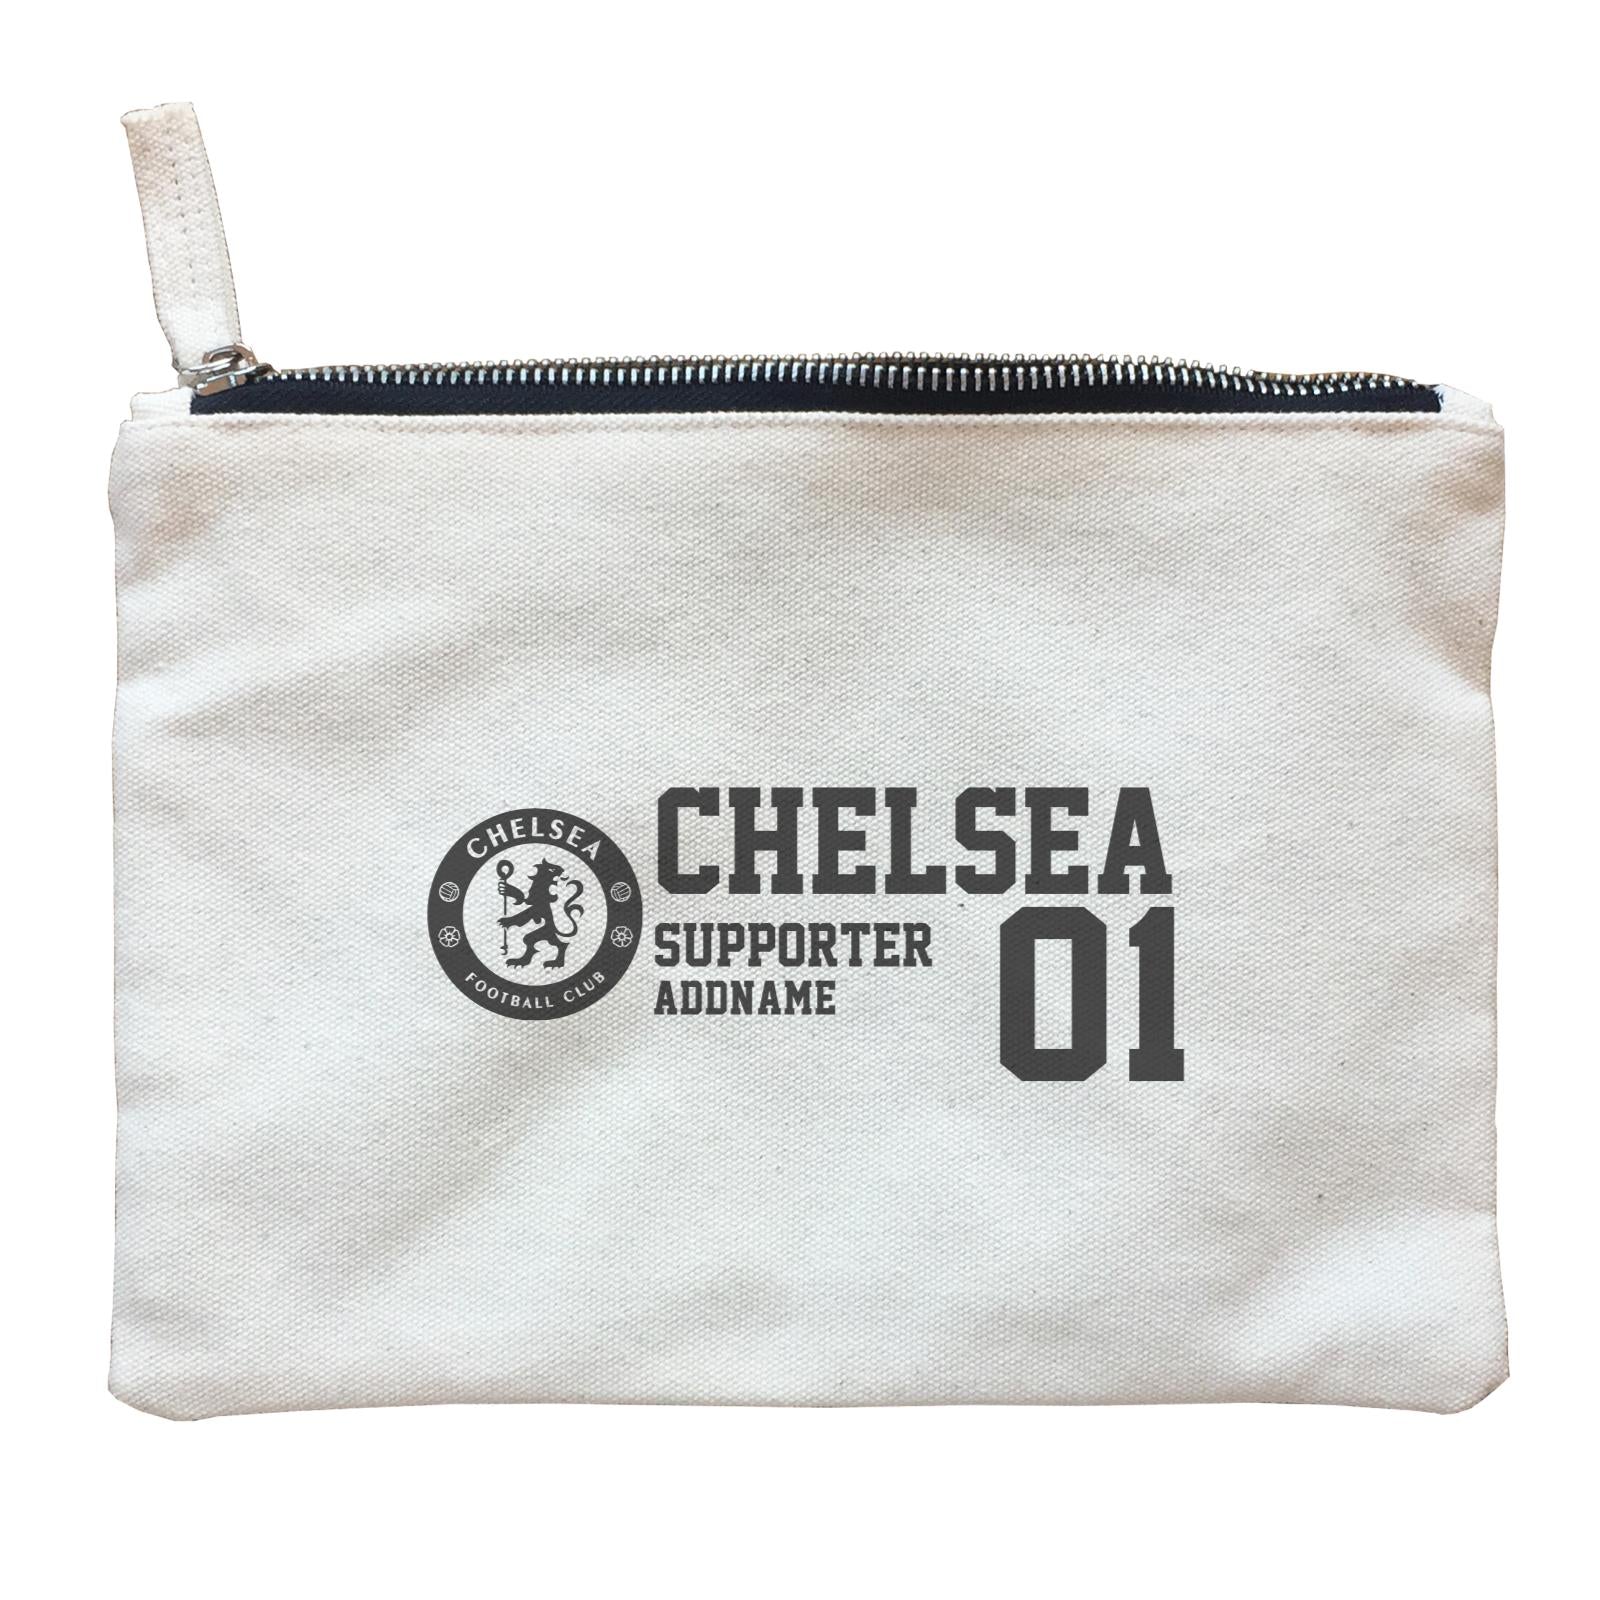 Chelsea Football Supporter Accessories Addname Zipper Pouch